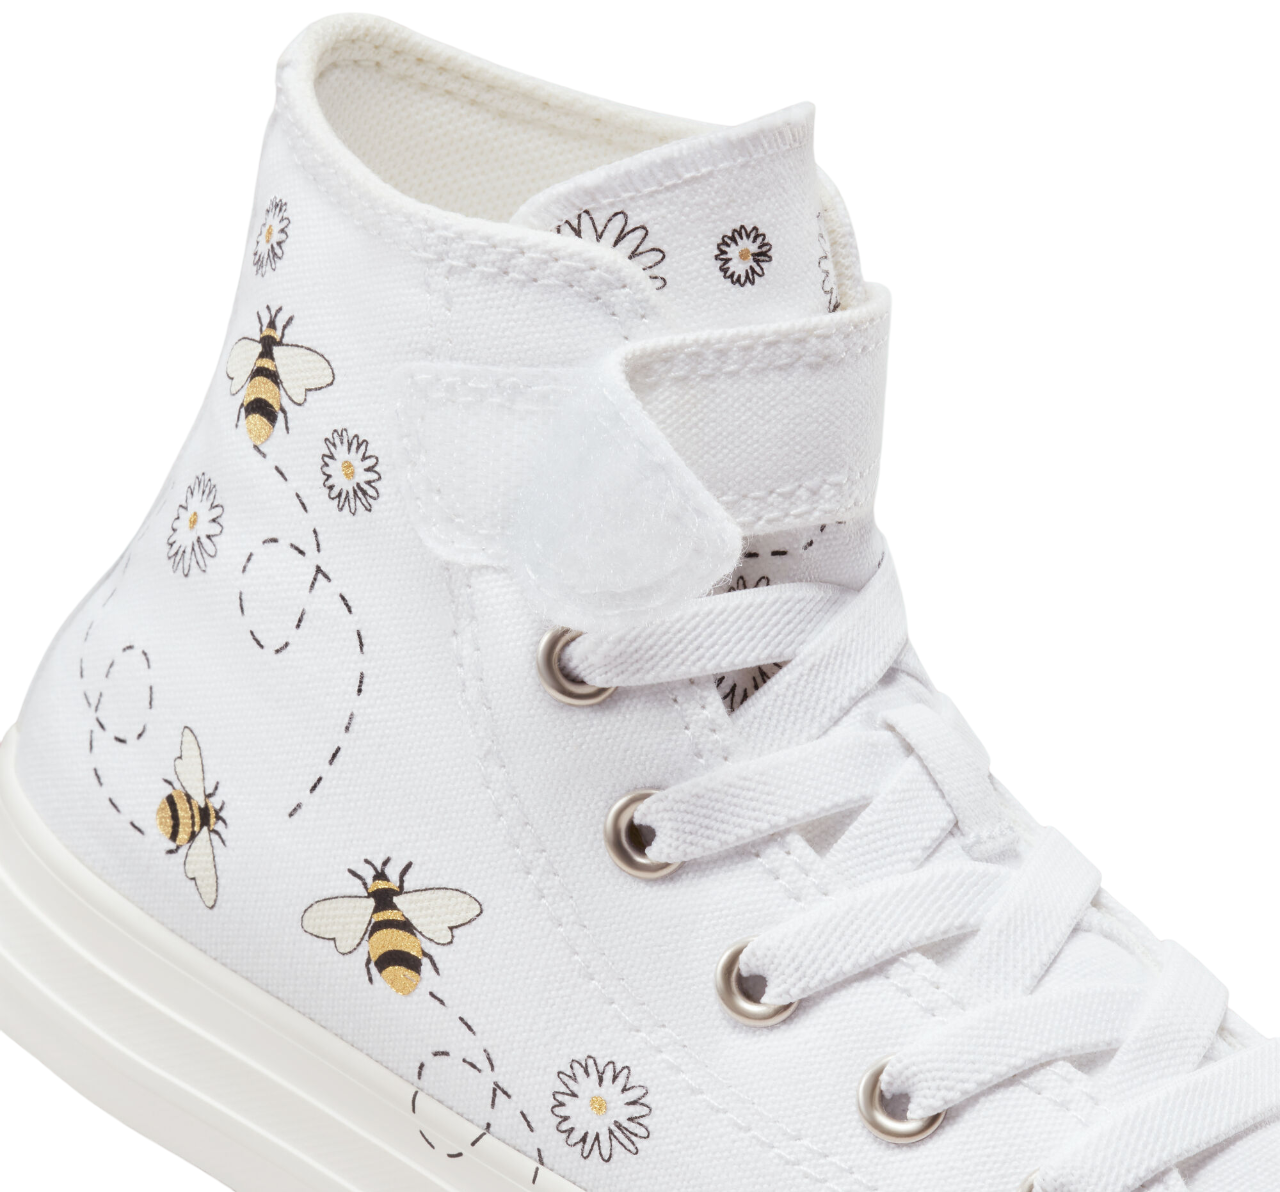 Converse Chuck Taylor All Star Easy-On Bees scarpa in tela alta A01619C white-black-yellow